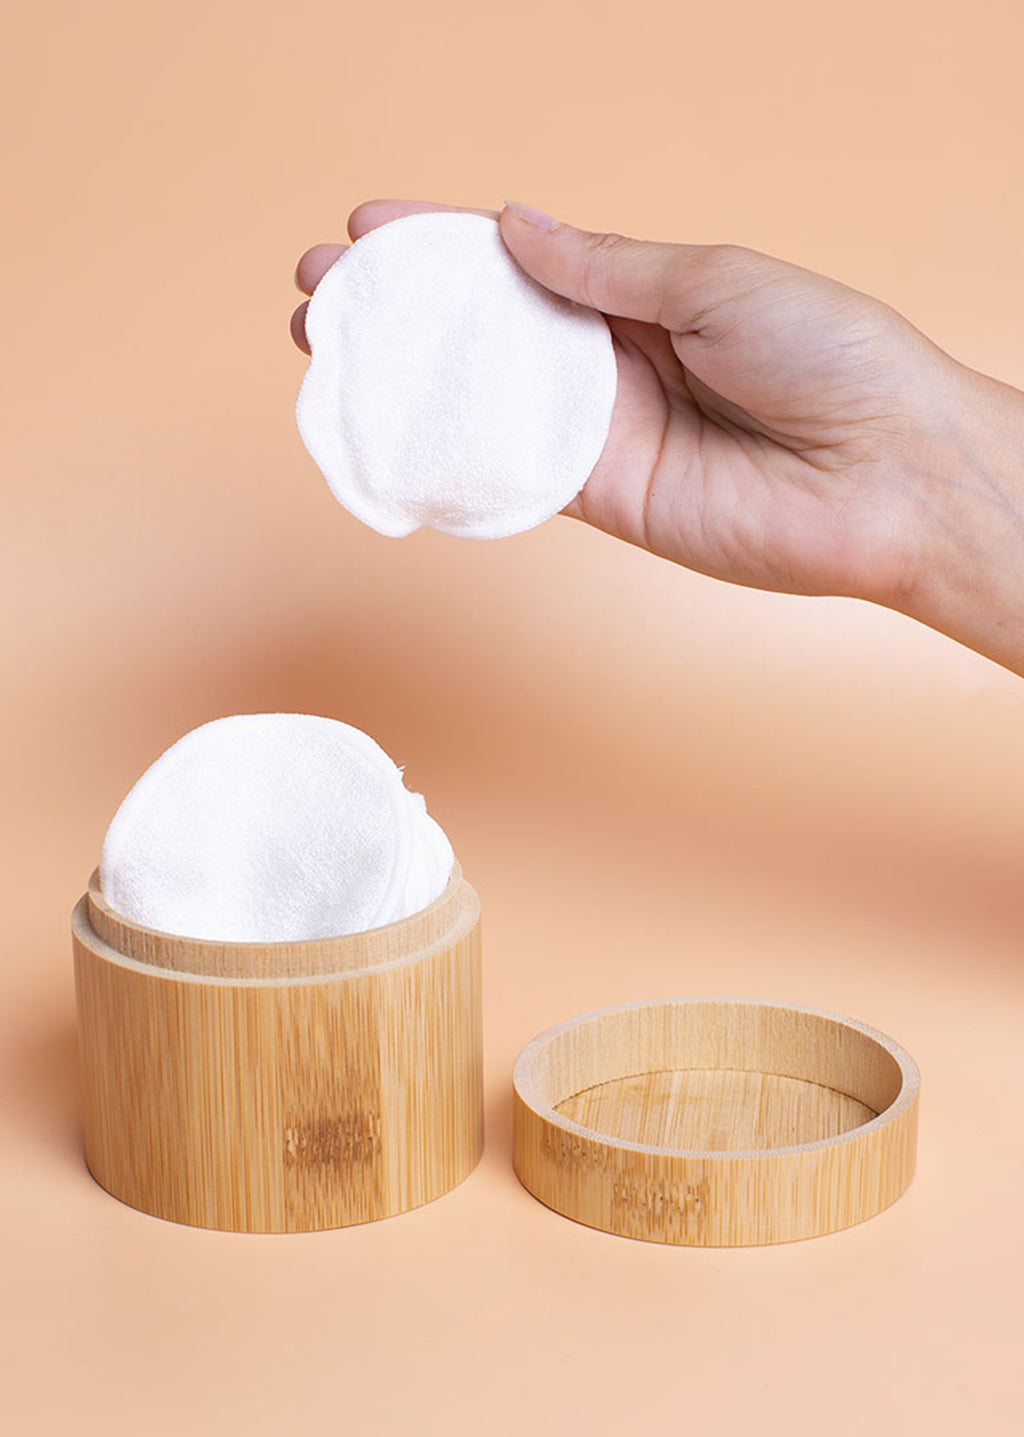 Make-up Remover Pads - Reusable